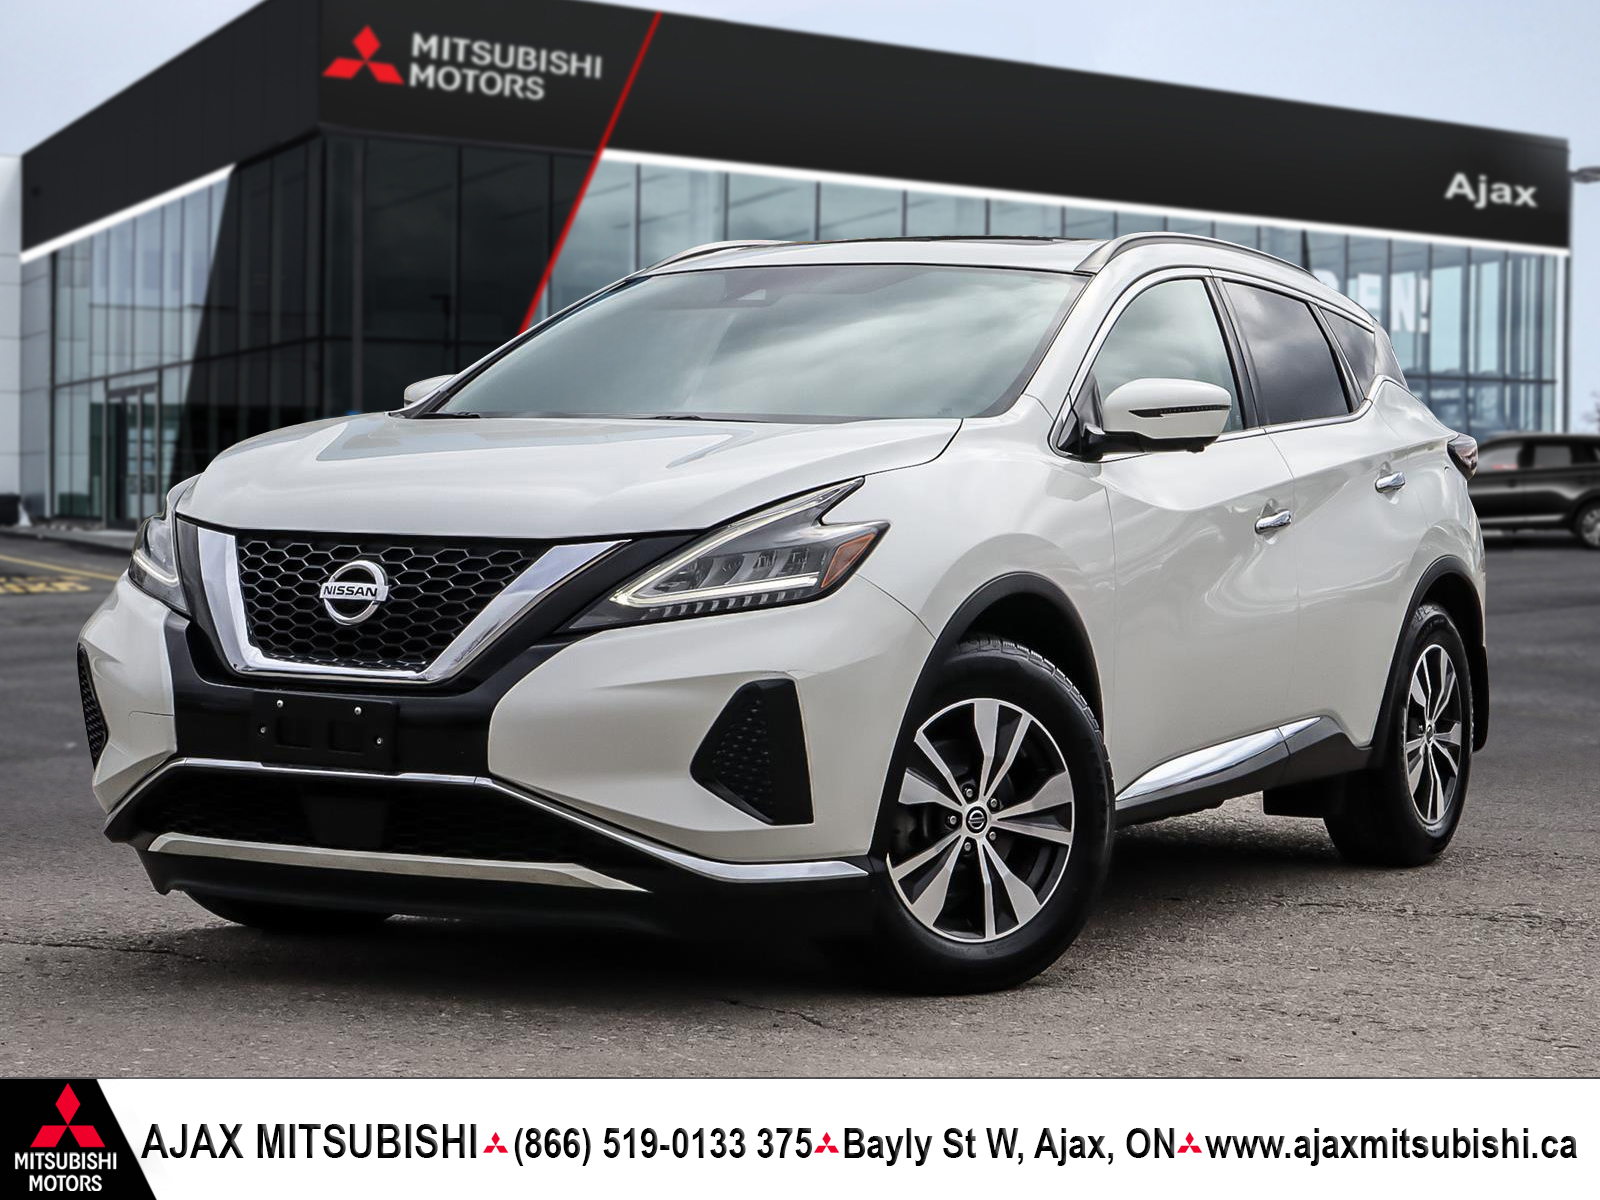 2020 Nissan Murano SV- AWD, Sunroof, Navigation and Alloy Wheels